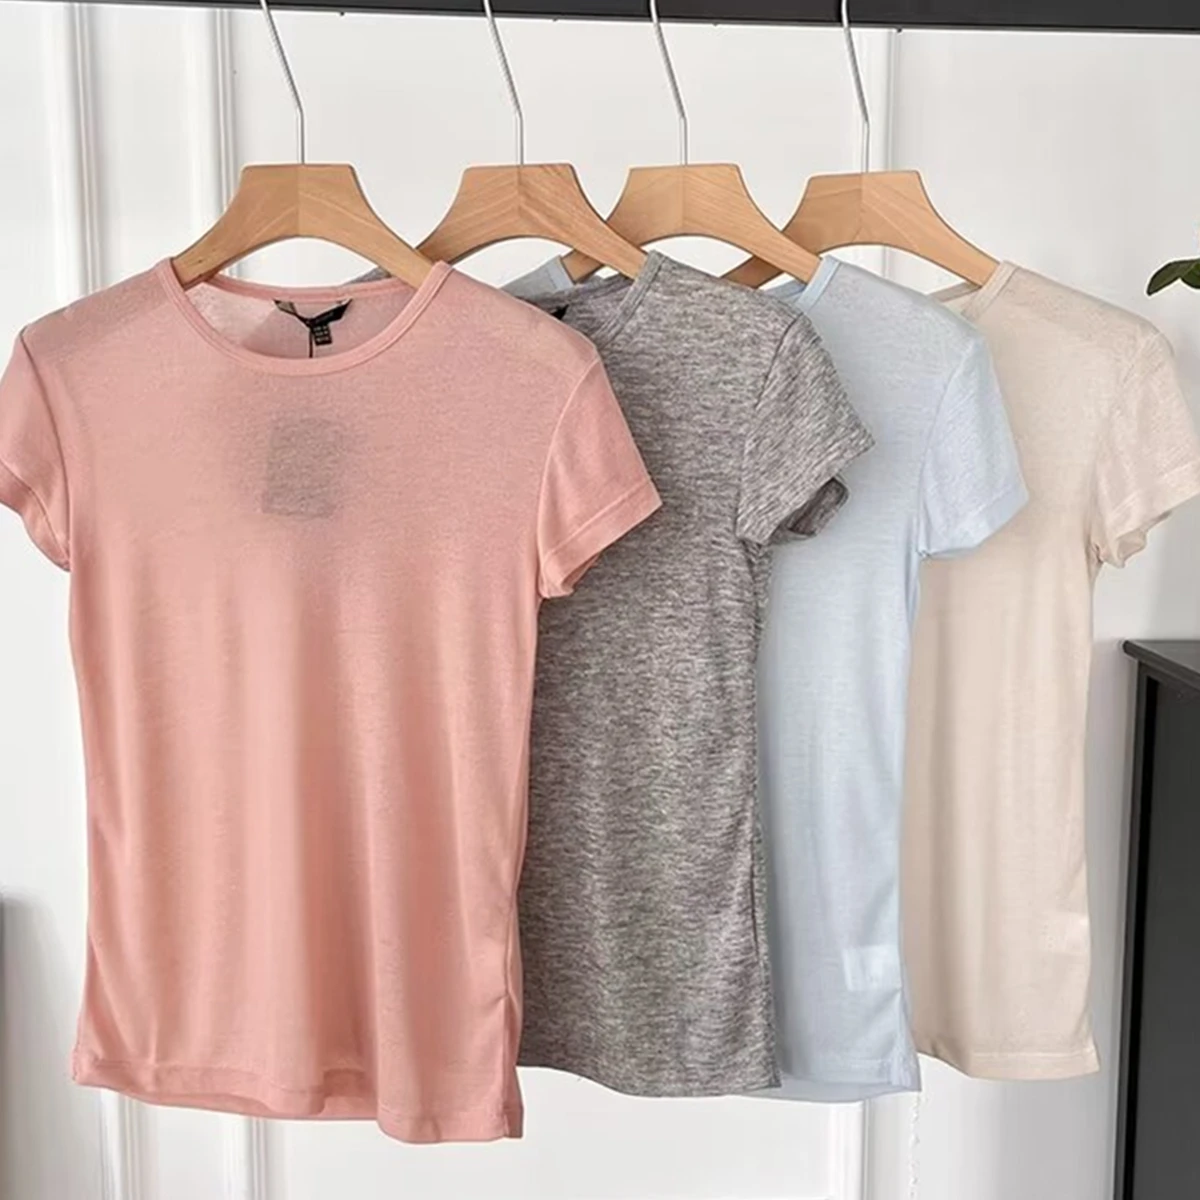 

Jenny&Dave Cotton Soft Casual Summer Tshirts Nordic Minimalist Solid Color Basic Round Neck T-Shirt For Women Top